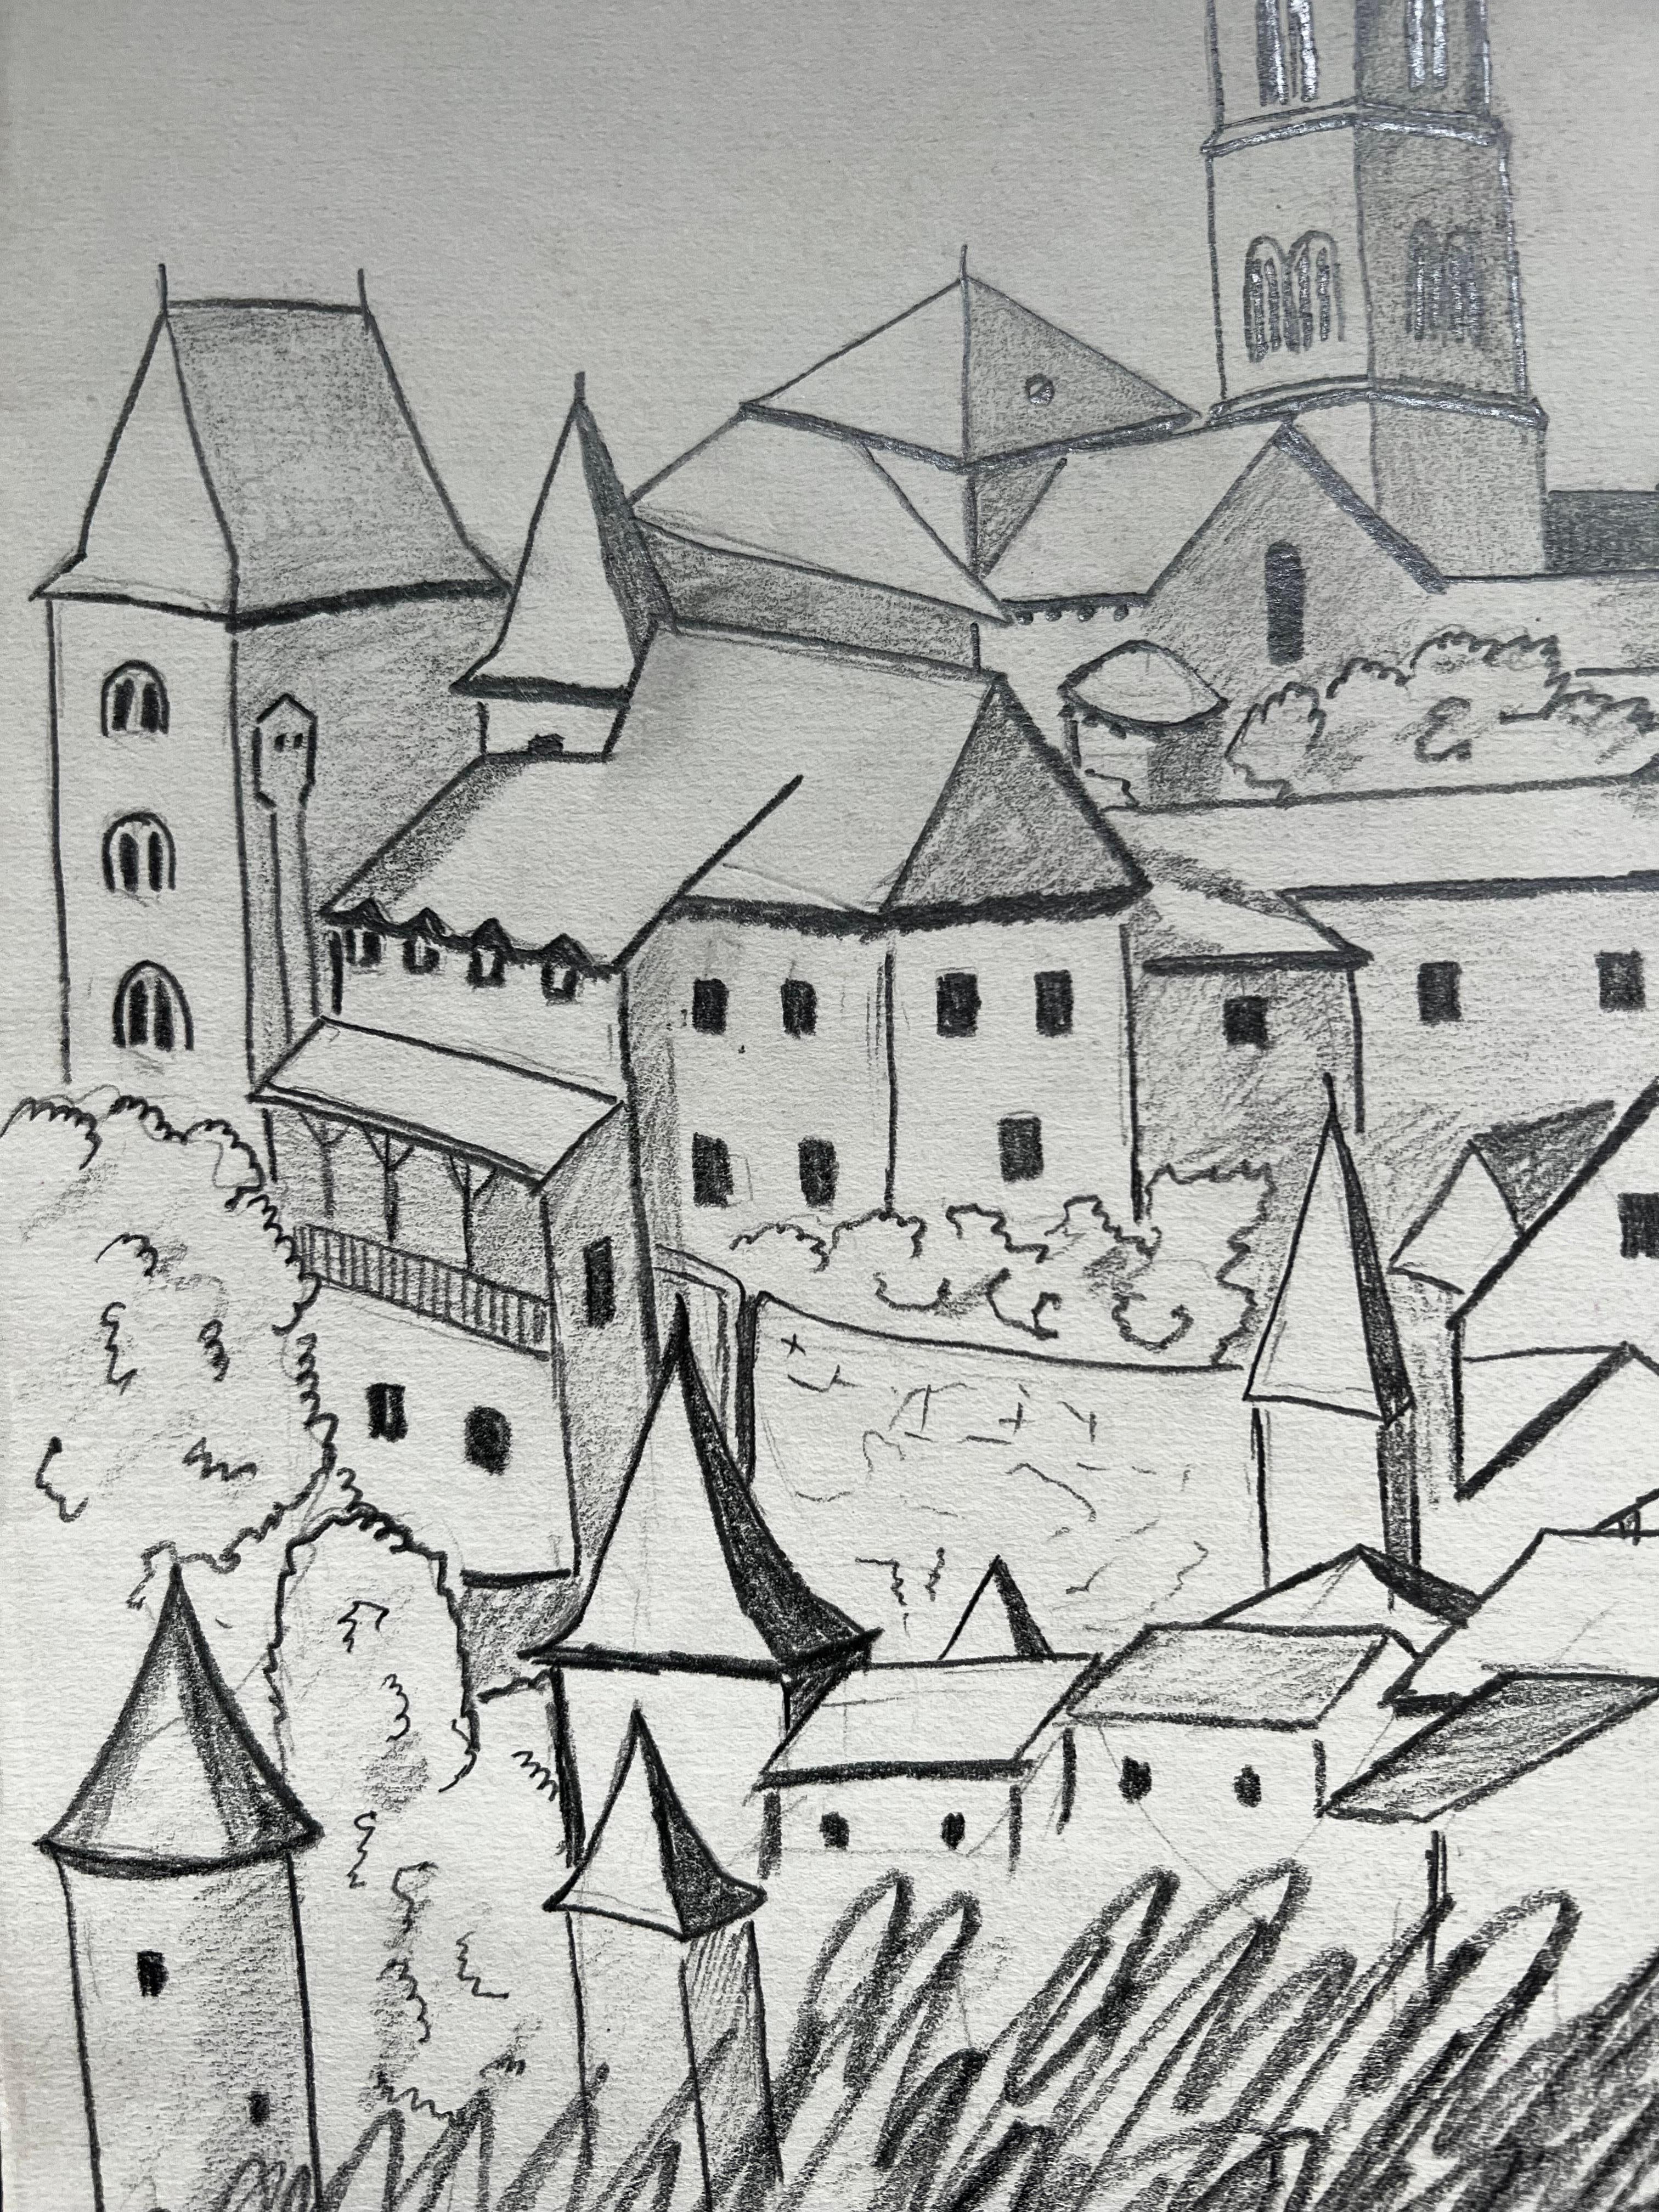 French Landscape
by Bernard Labbe (French mid 20th century)
original pencil drawing on artist paper, unframed
size: 11 x 9.5 inches
condition: very good and ready to be enjoyed

provenance: the artists atelier/ studio, France (stamped verso)